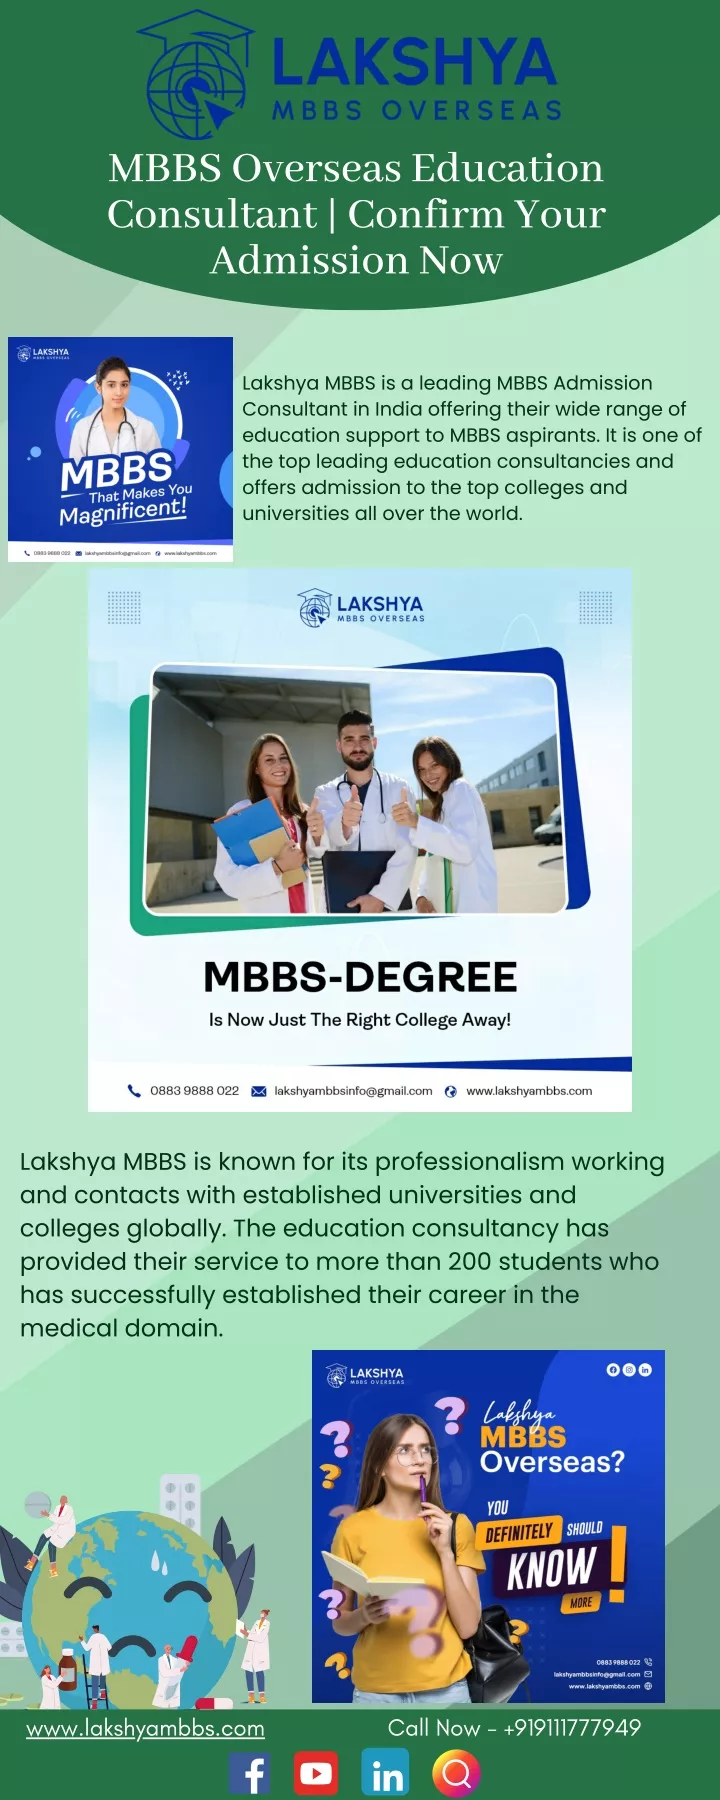 mbbs overseas education consultant confirm your